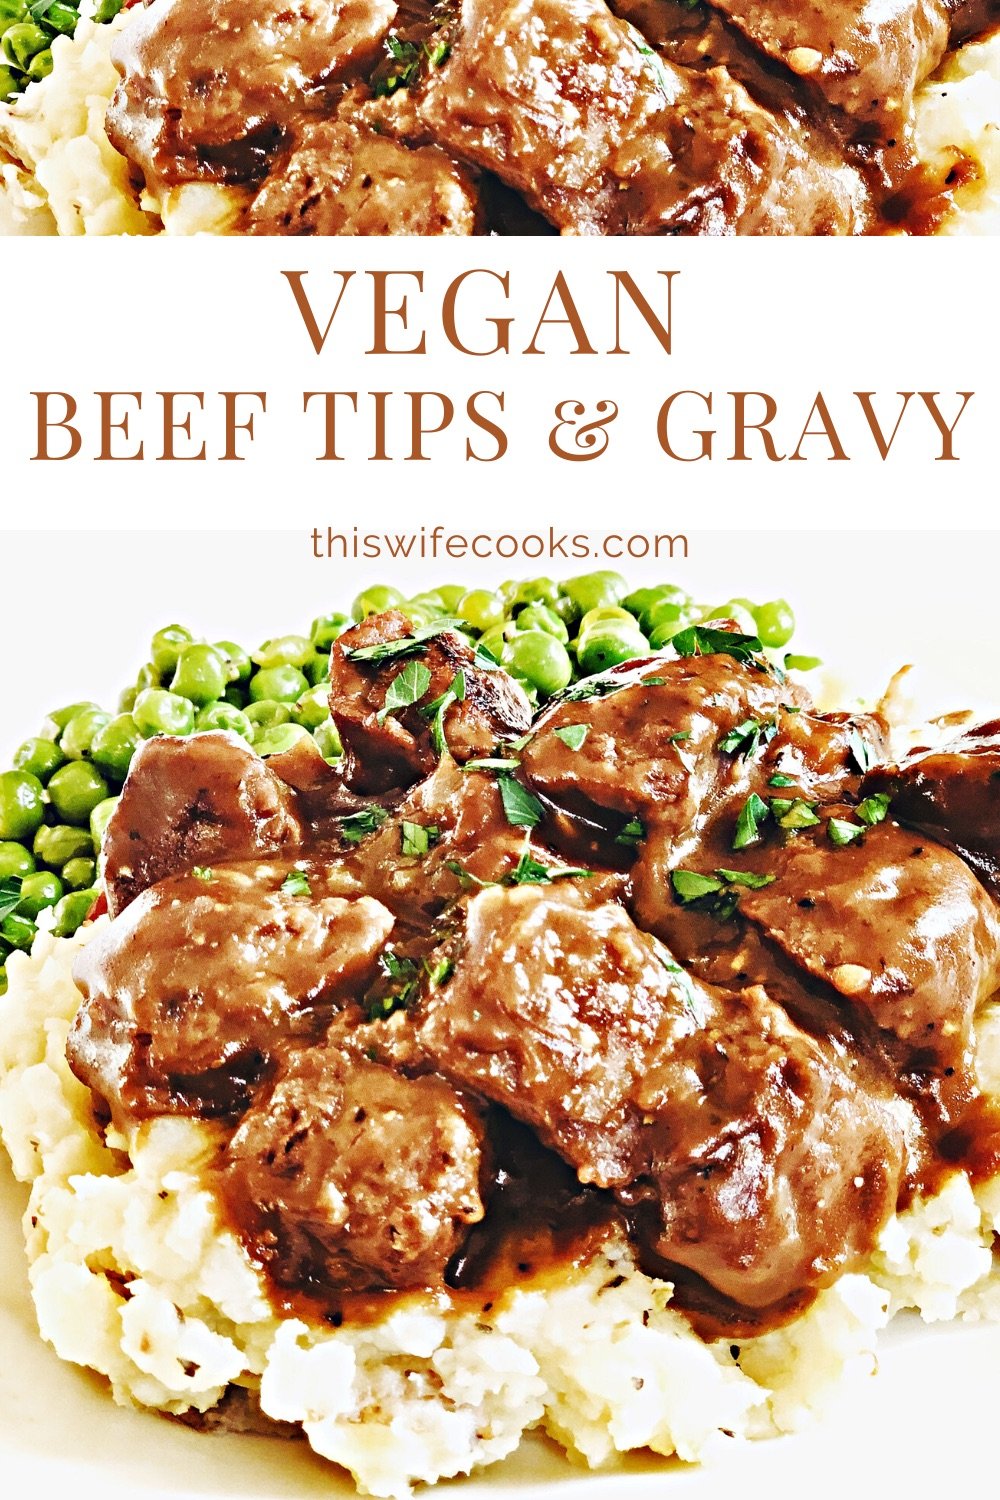 Vegan Beef Tips and Gravy - A hearty and delicious plant-based version of the meat and potatoes classic! #veganbeefrecipes #veganbeeftipsandgravy #veganbeeftipsrecipes #plantbasedbeefrecipes #thiswifecooksrecipes #veganquarantinerecipes #gardeinrecipes #easyvegandinnerrecipes via @thiswifecooks